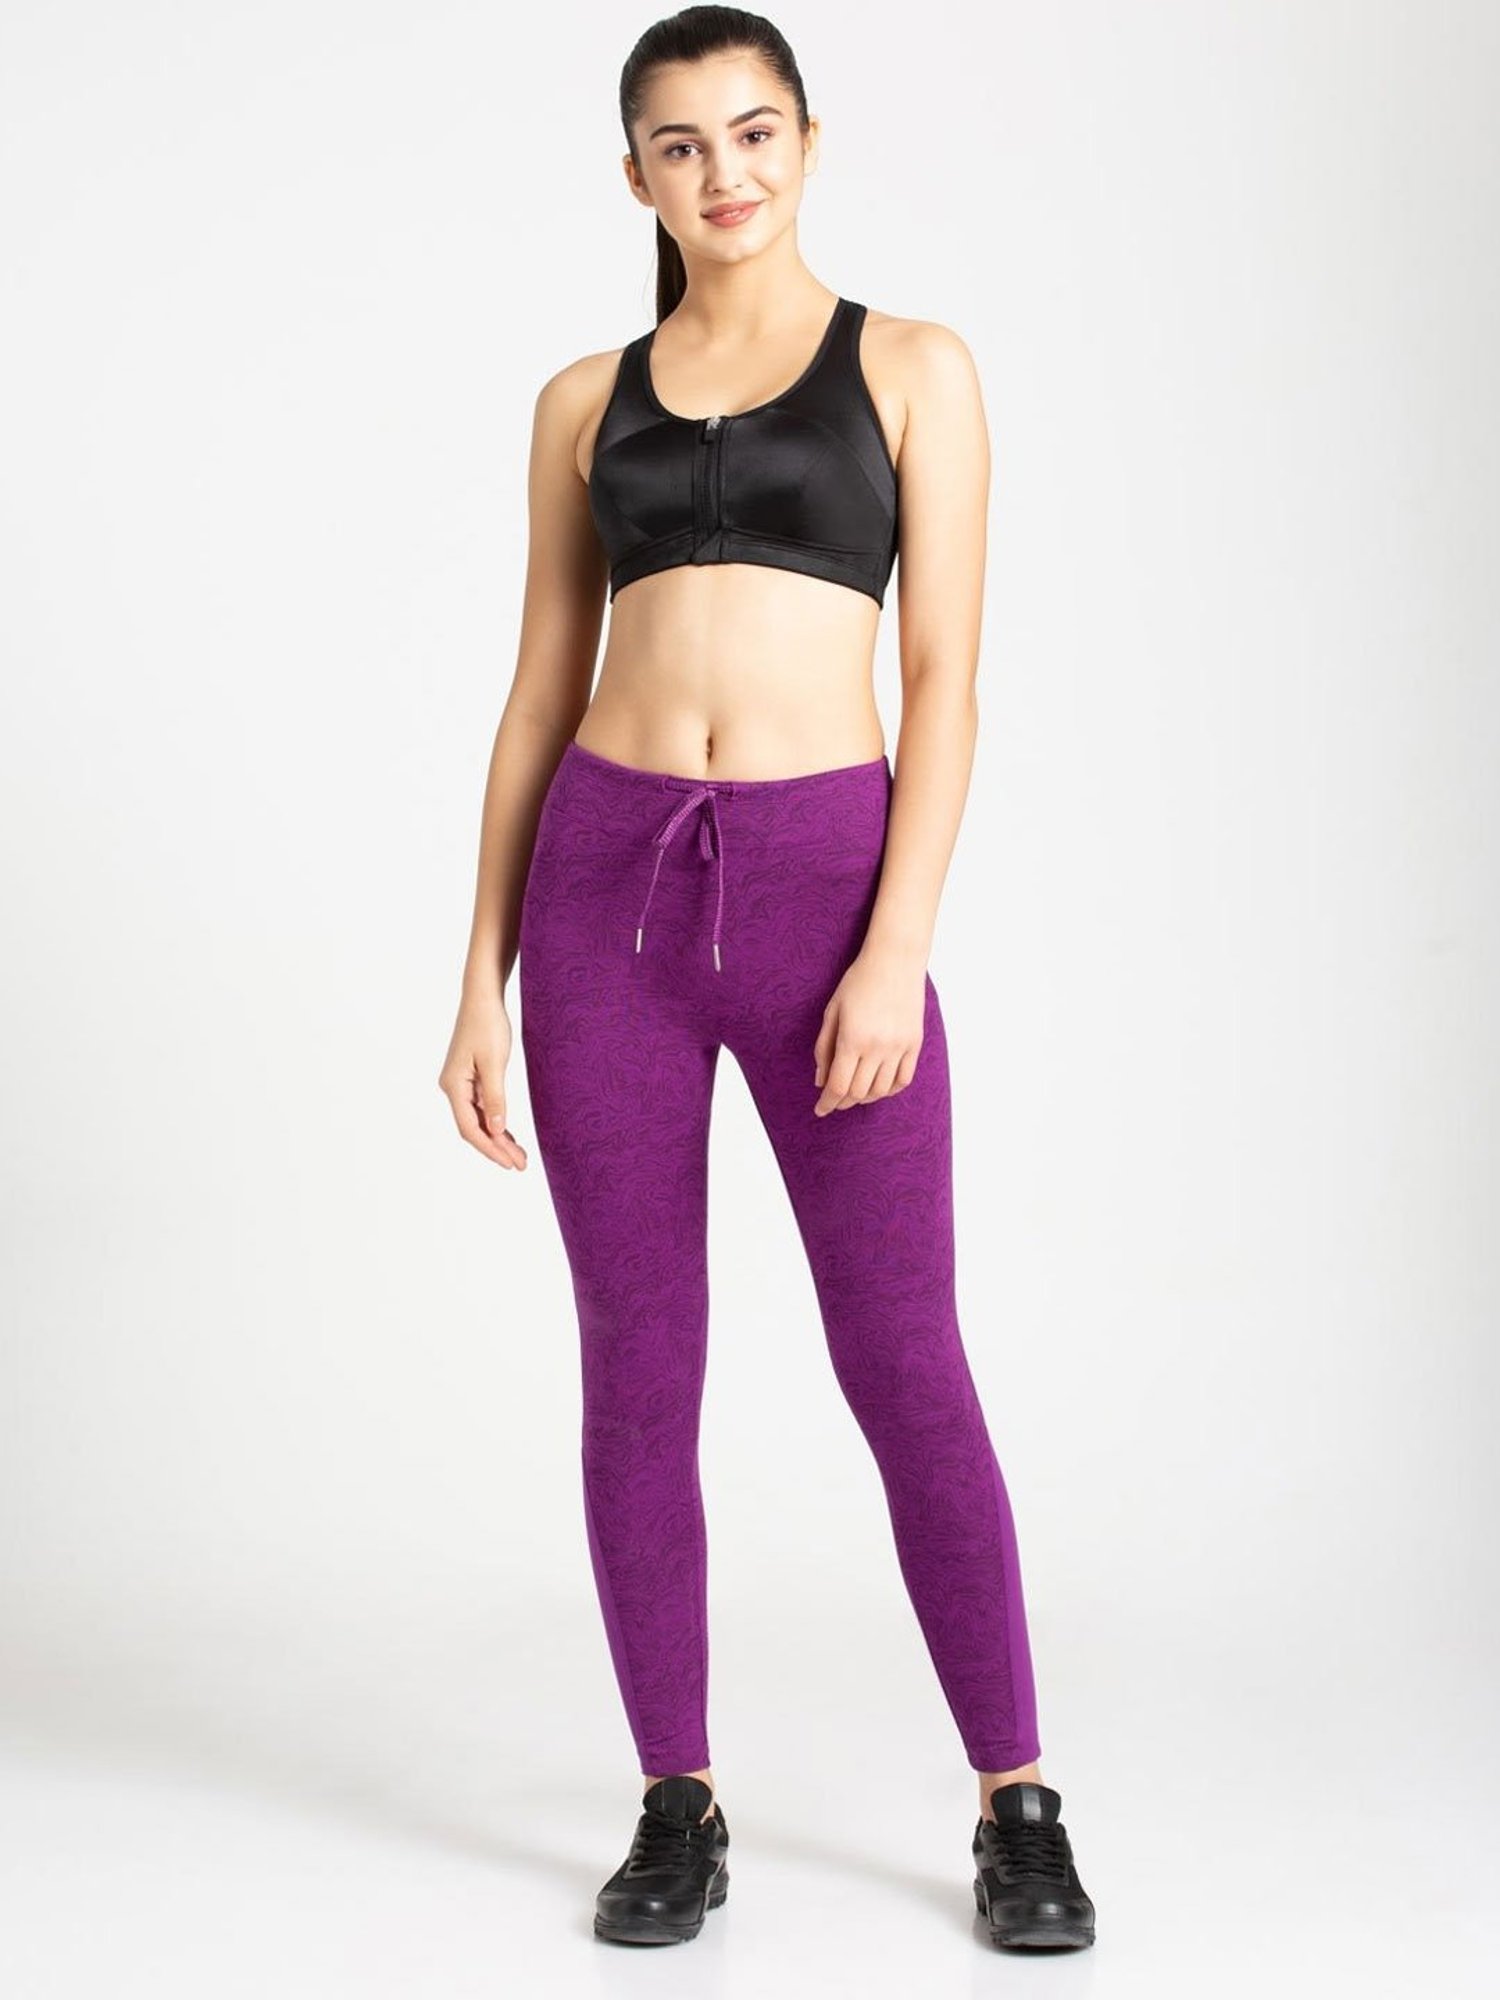 Jockey Purple Glory Printed Yoga Pant Price Starting From Rs 845. Find  Verified Sellers in Theni - JdMart